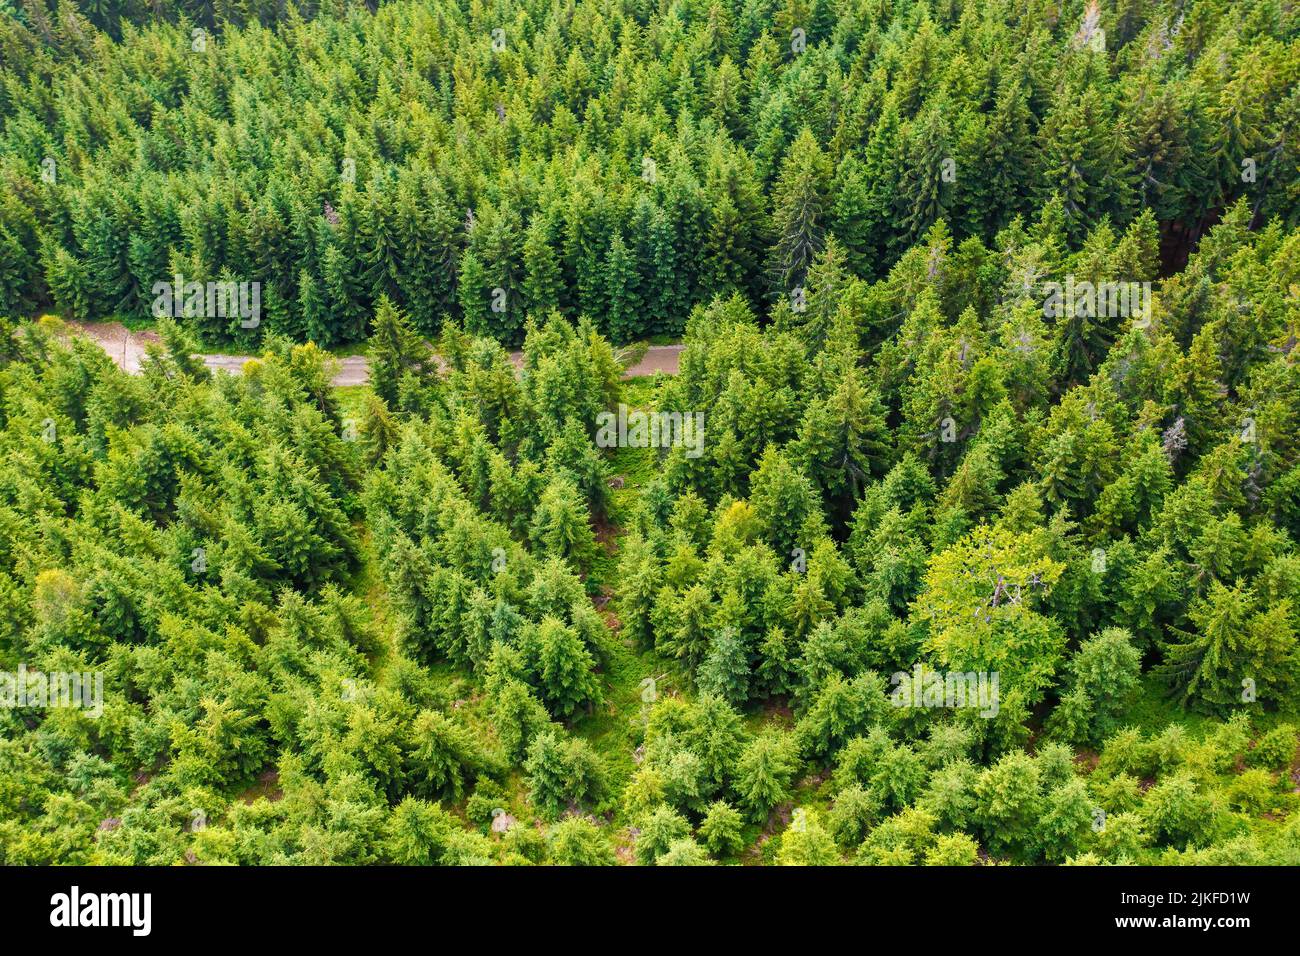 Aerial view of amazing landscape with high trees on the hills in a summer sunny day, Dolni Morava, Czech Republic. Stock Photo